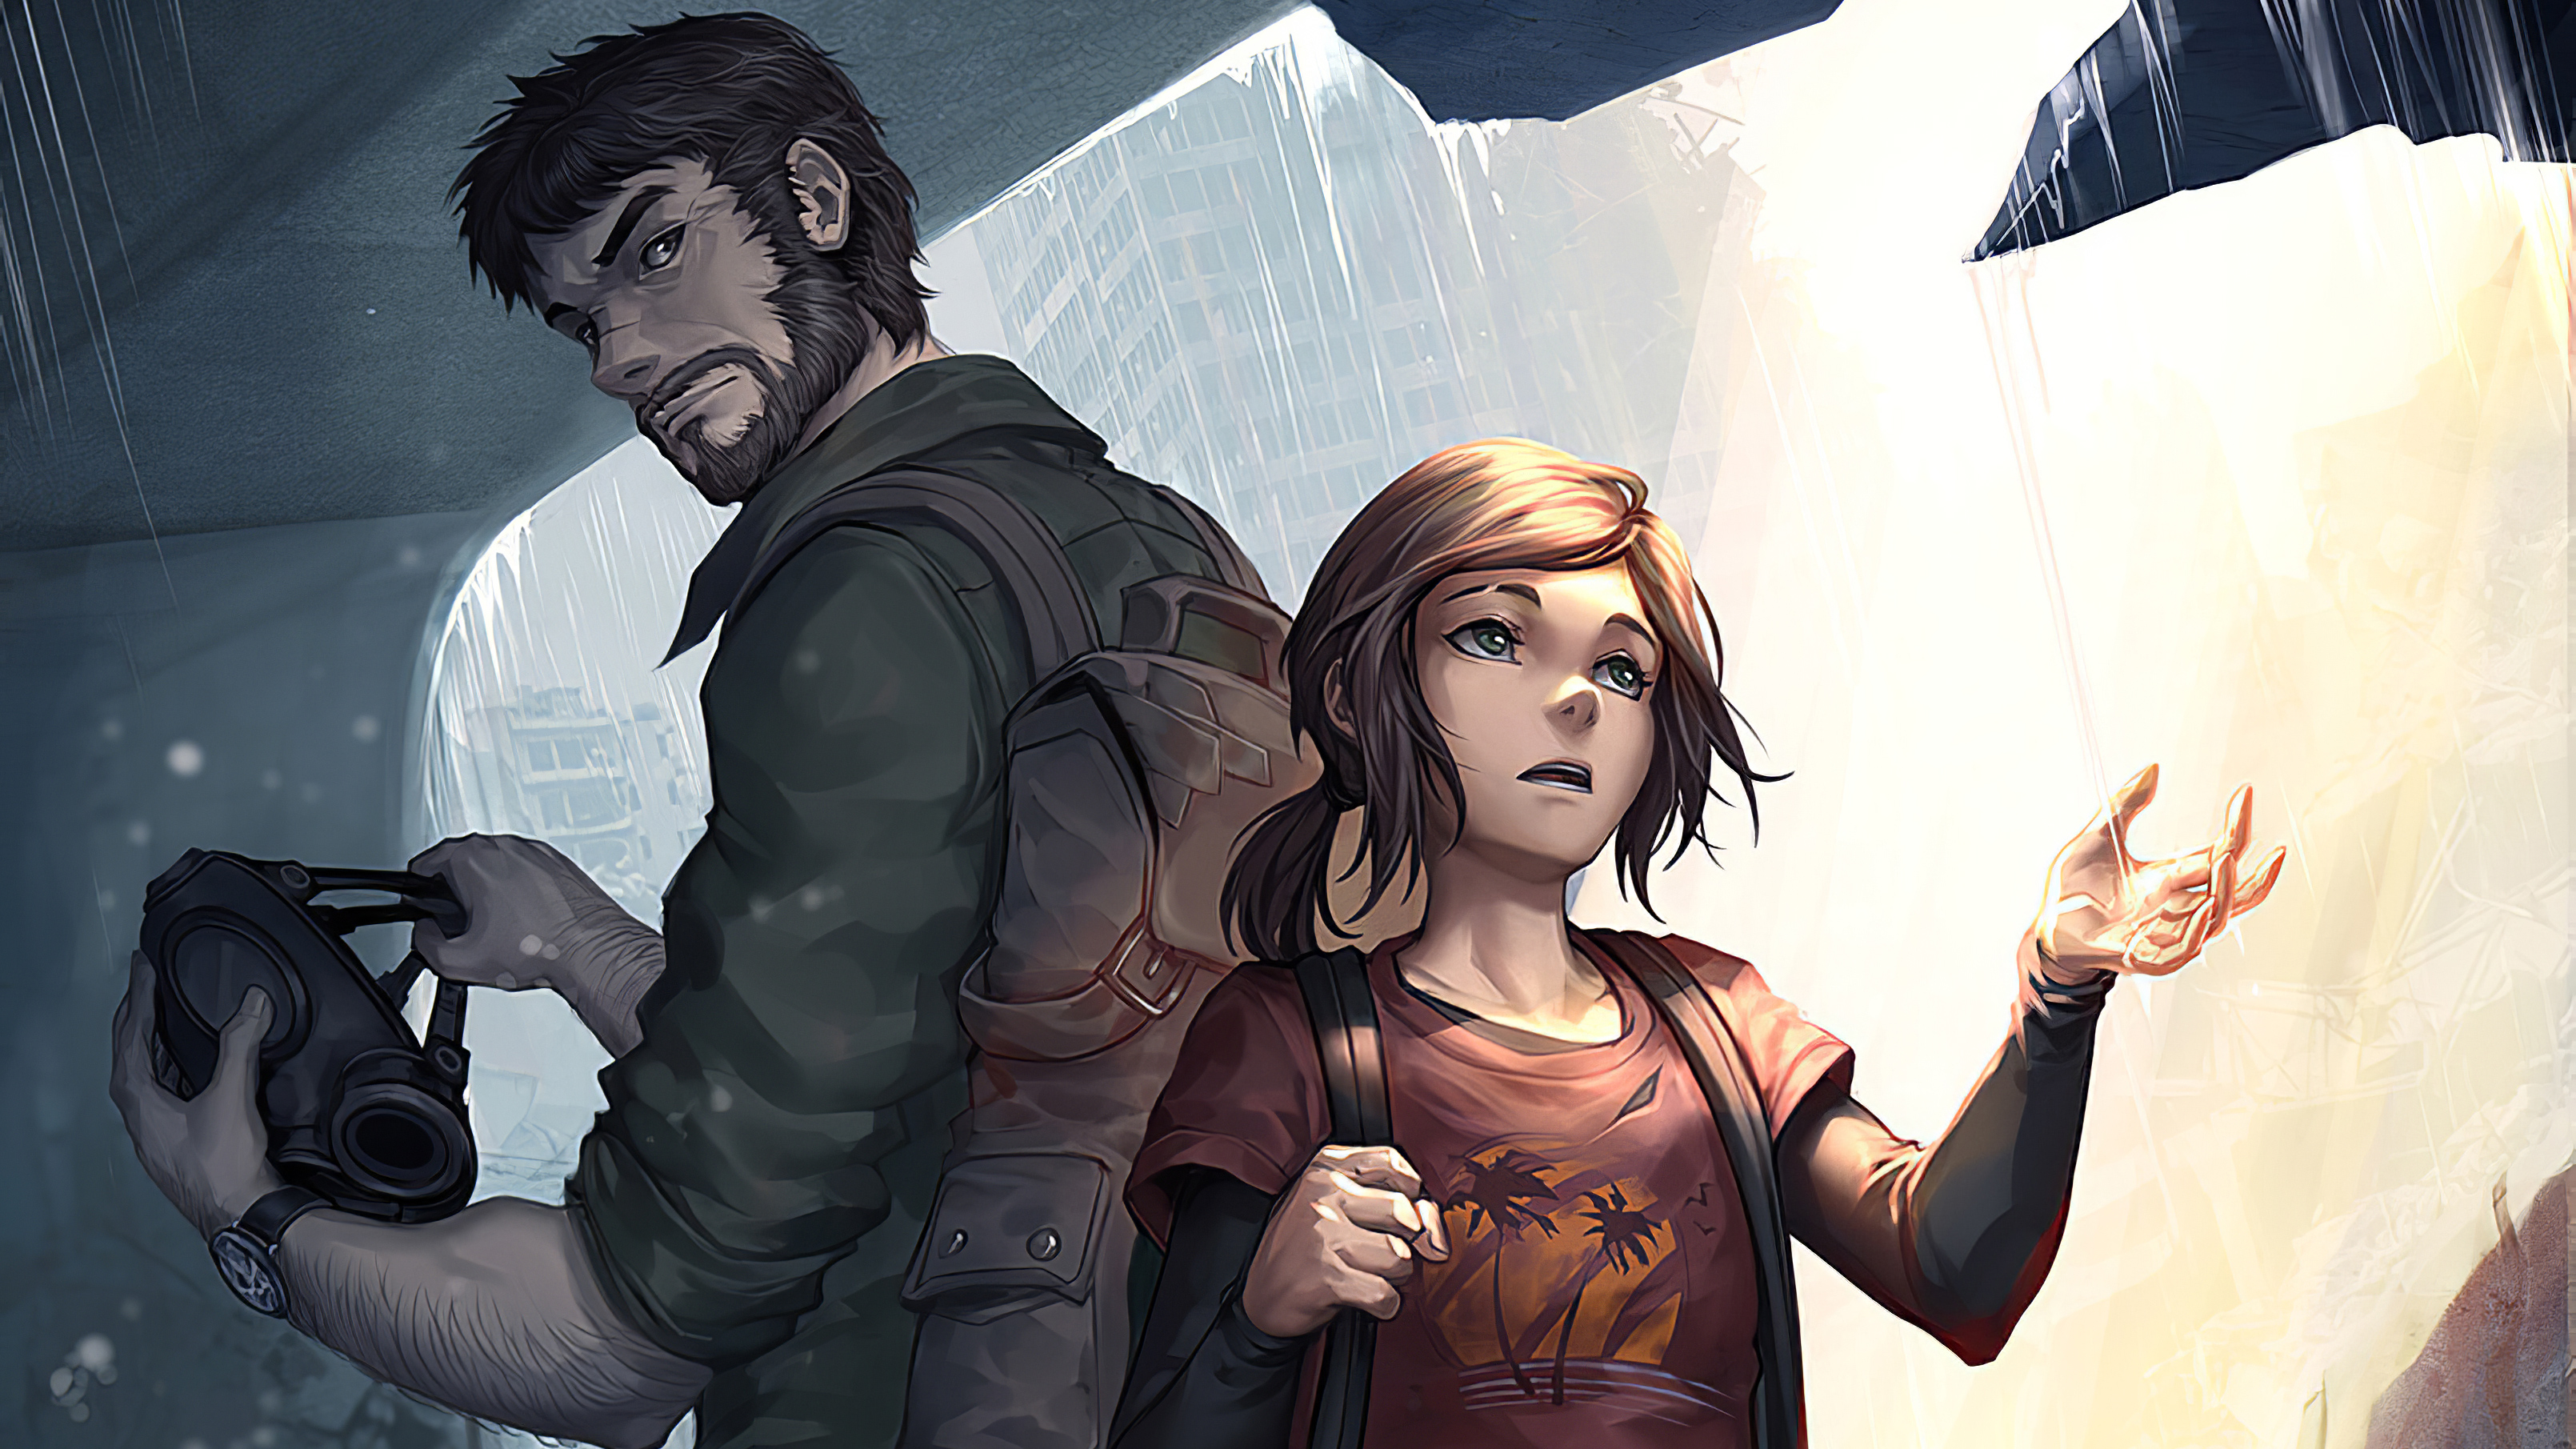 Video Game The Last of Us Part II HD Wallpaper by Quirkilicious